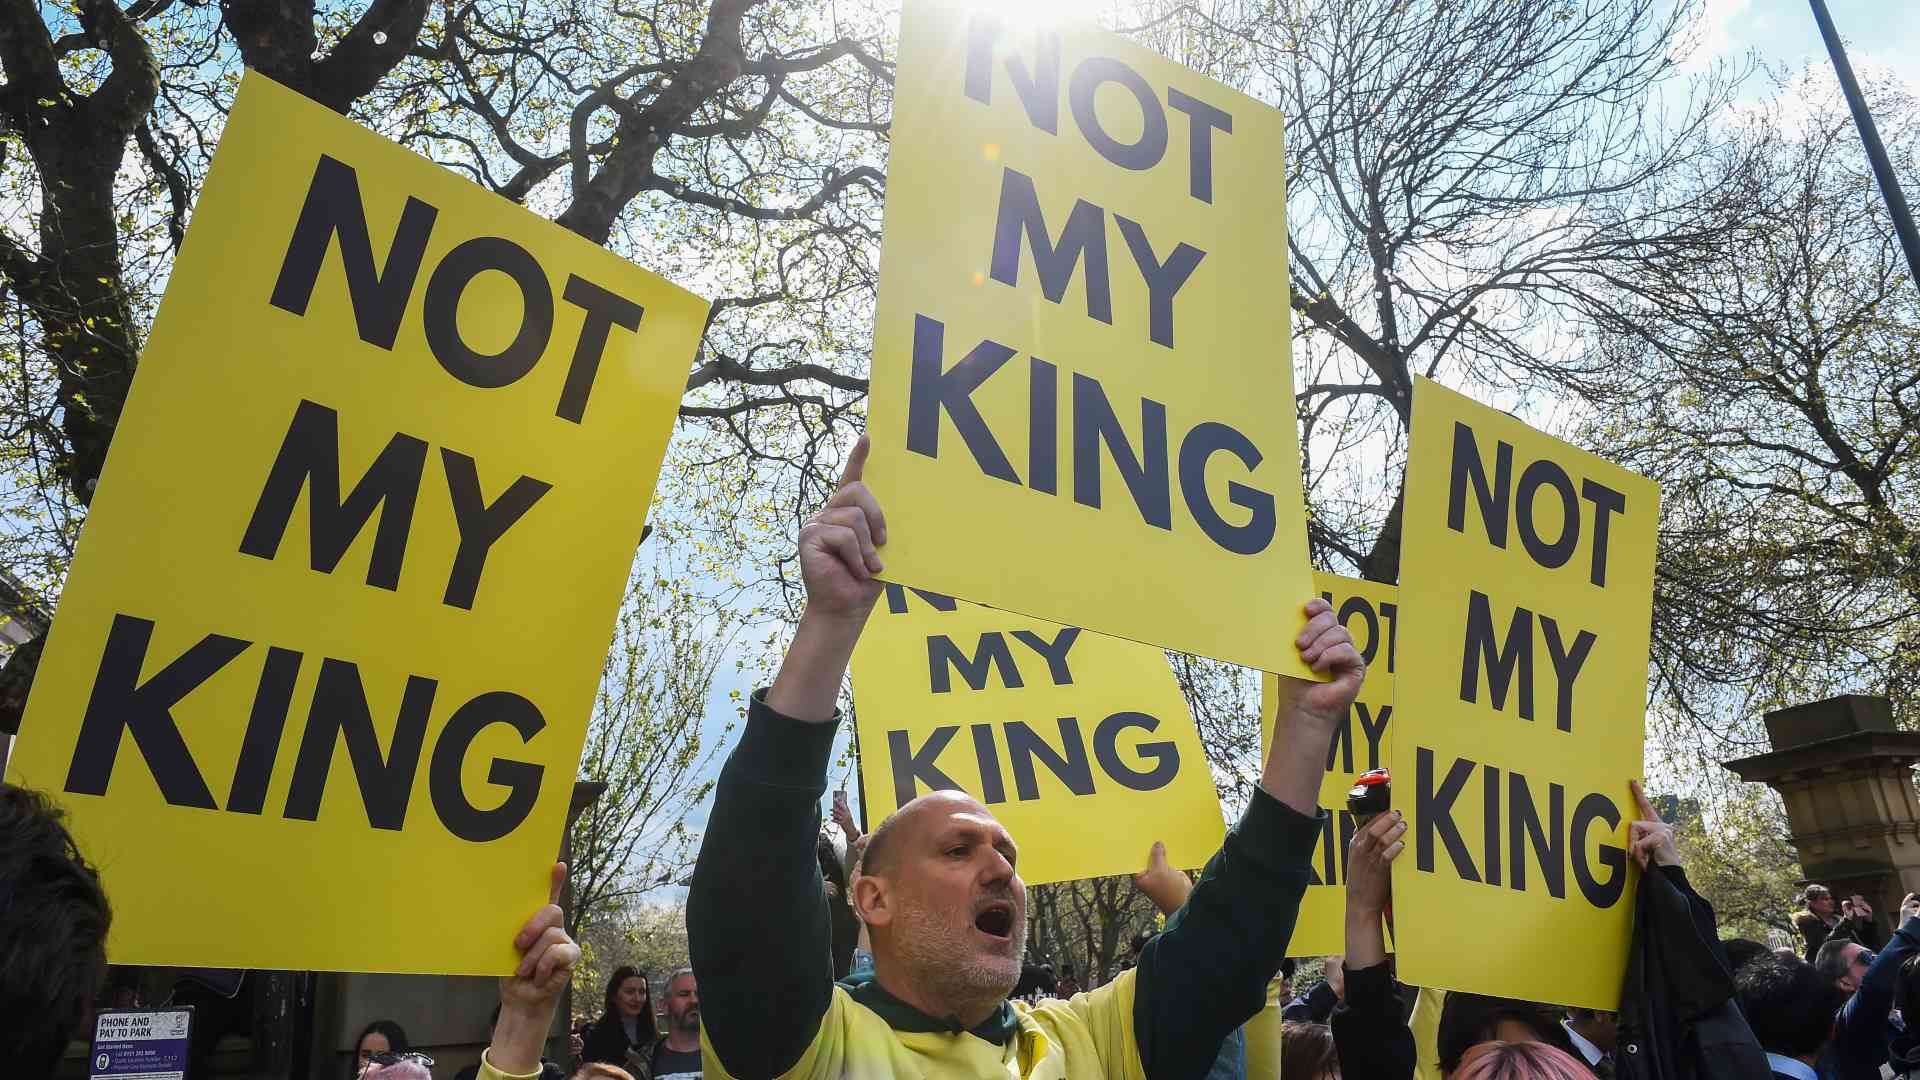 Not my king protestes republicans carles iii / EFE